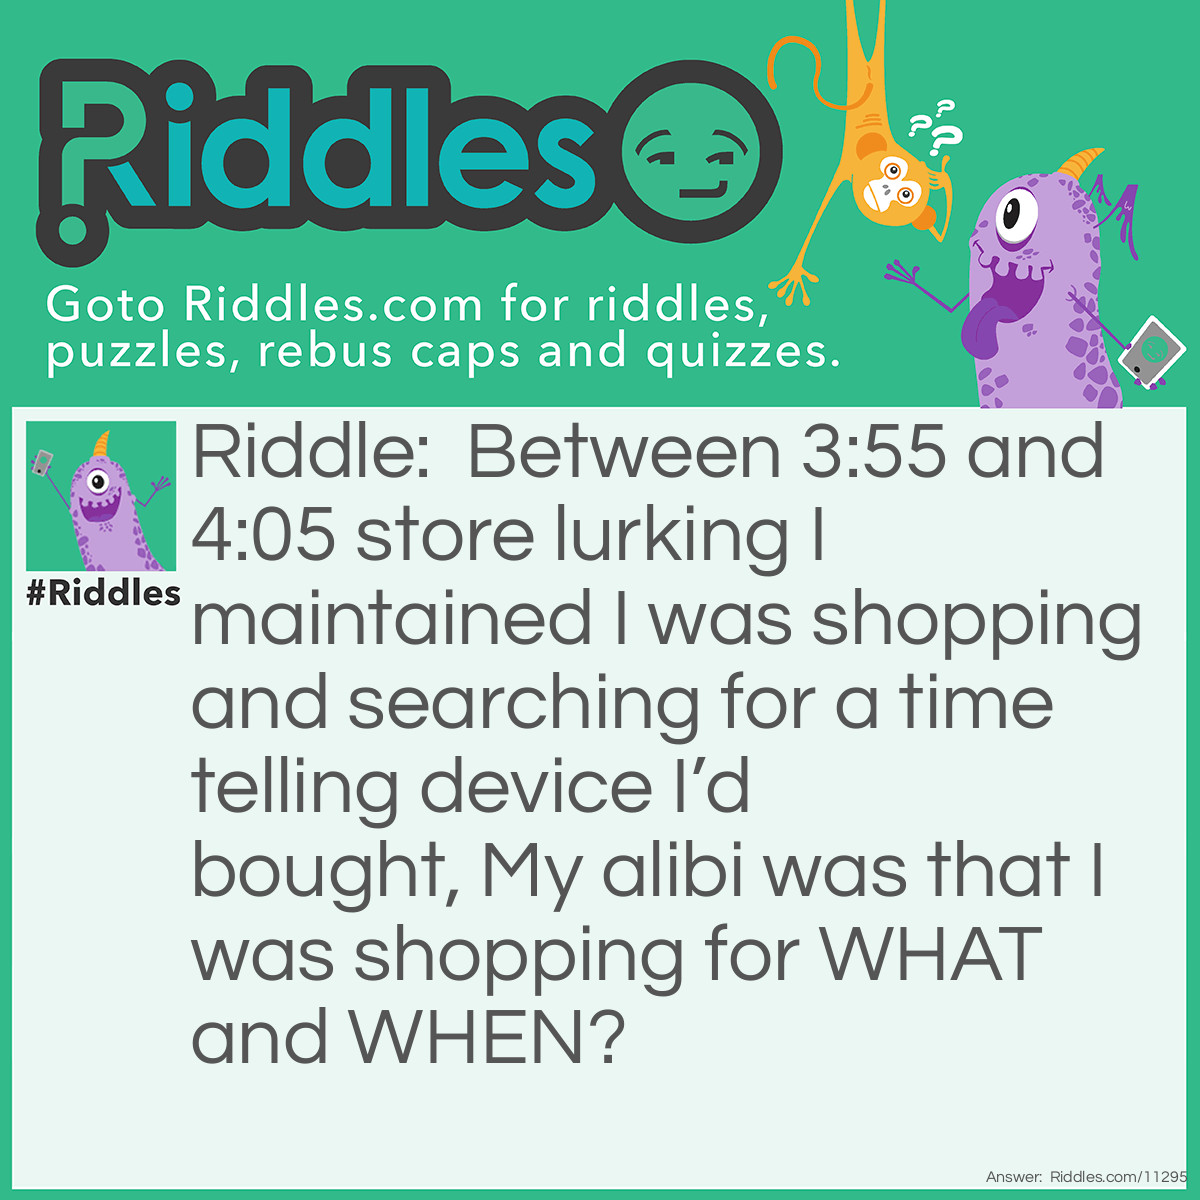 Riddle: Between 3:55 and 4:05 store lurking I maintained I was shopping and searching for a time telling device I’d bought, My alibi was that I was shopping for WHAT and WHEN? Answer: I was shopping around for a clock and I was shopping around 4 O’clock